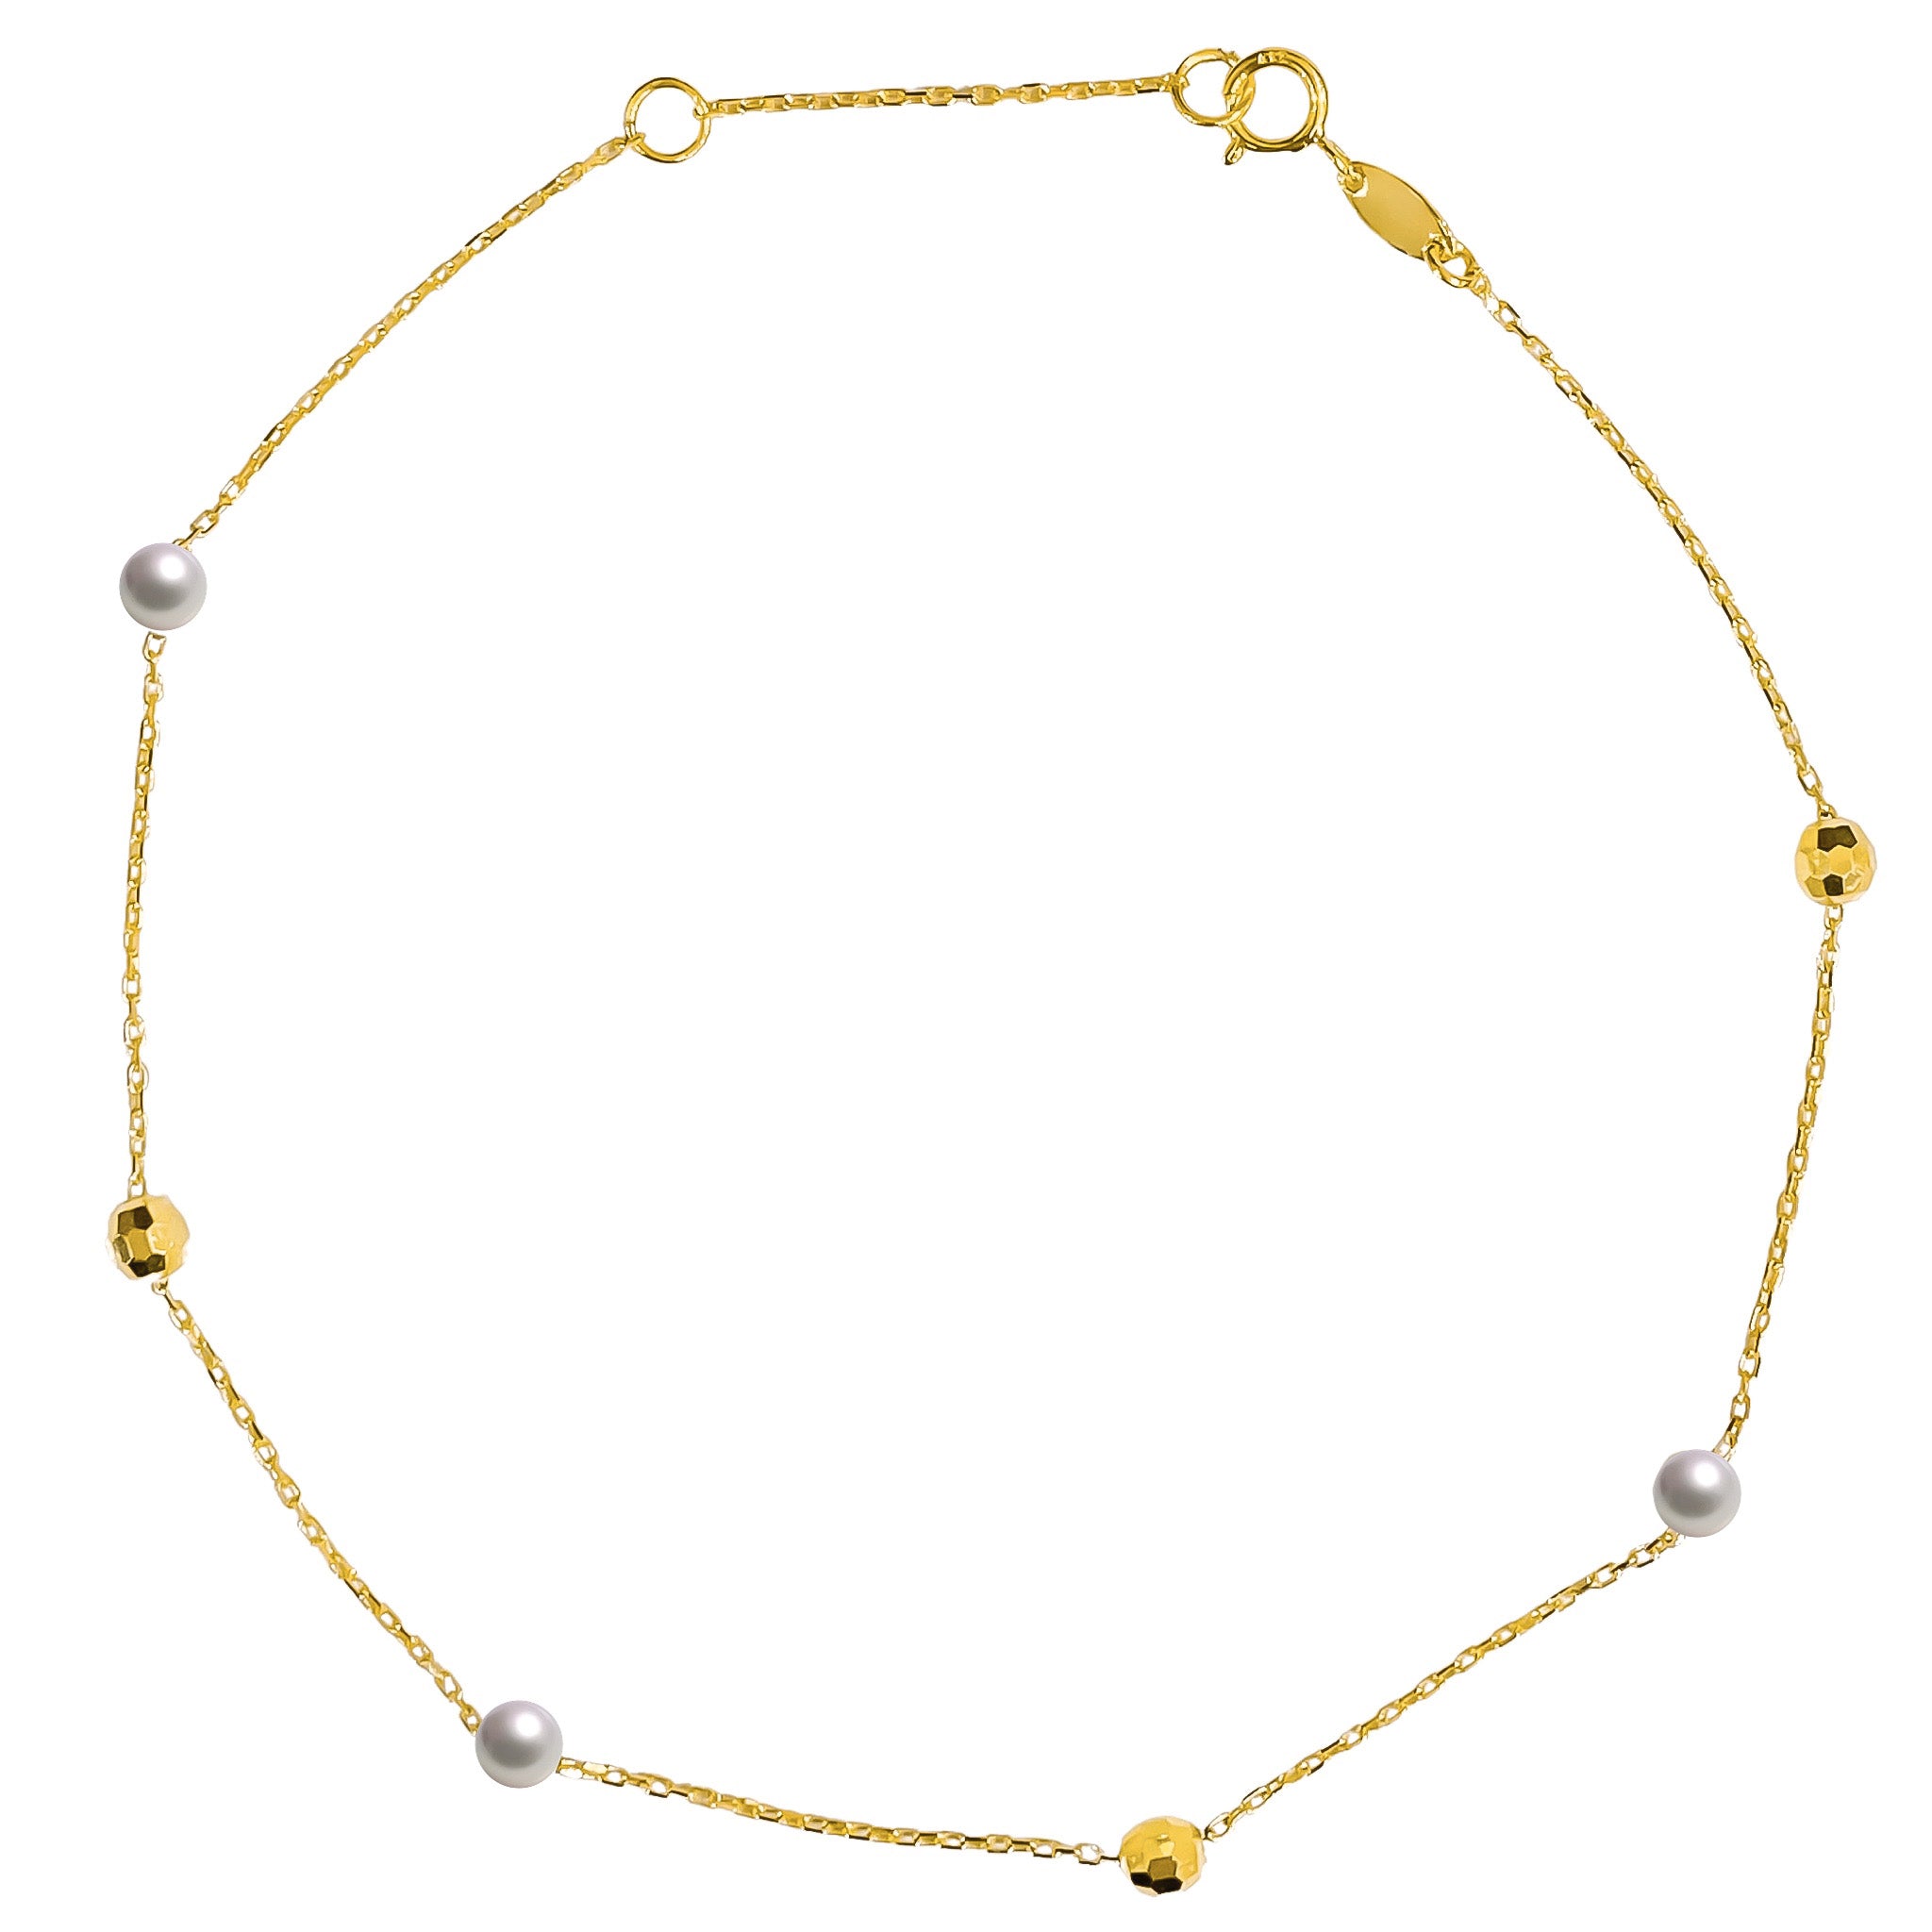 10K YELLOW GOLD BEADED PEARL ANKLET